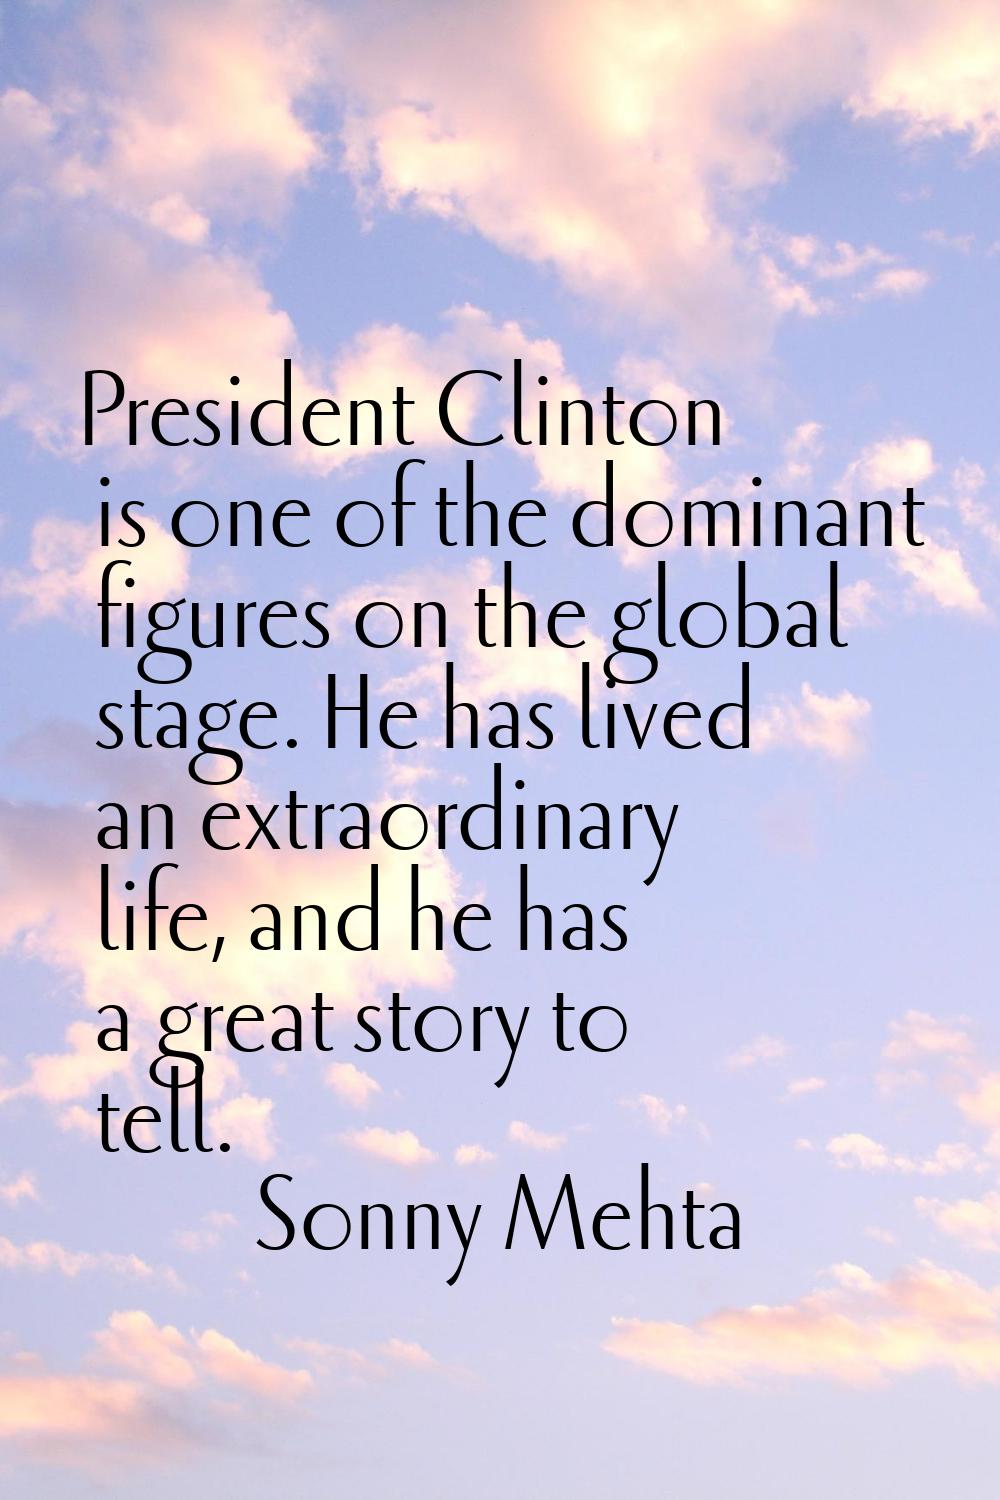 President Clinton is one of the dominant figures on the global stage. He has lived an extraordinary